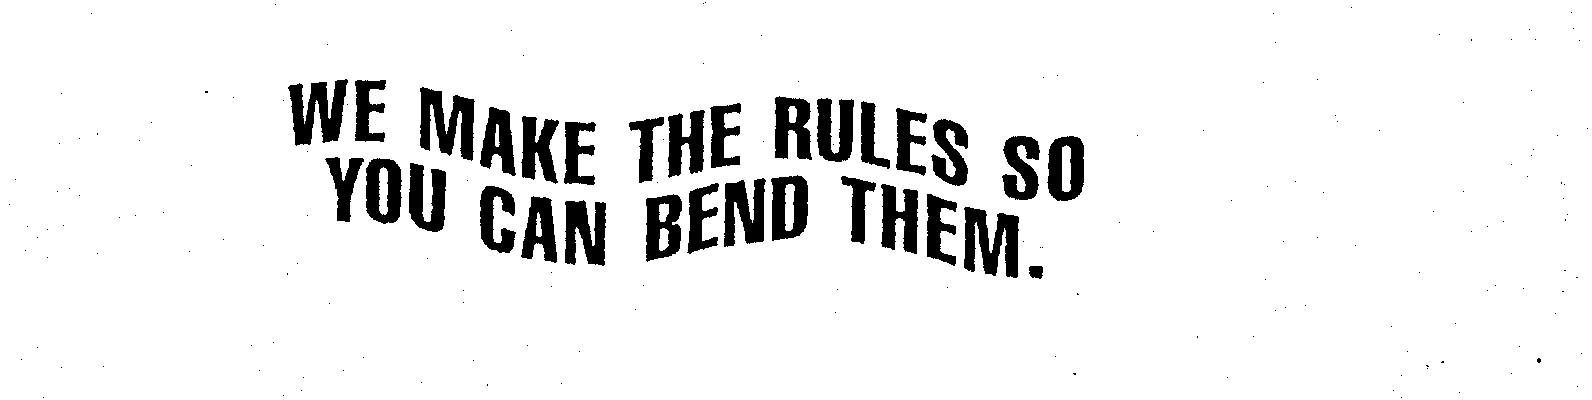  WE MAKE THE RULES SO YOU CAN BEND THEM